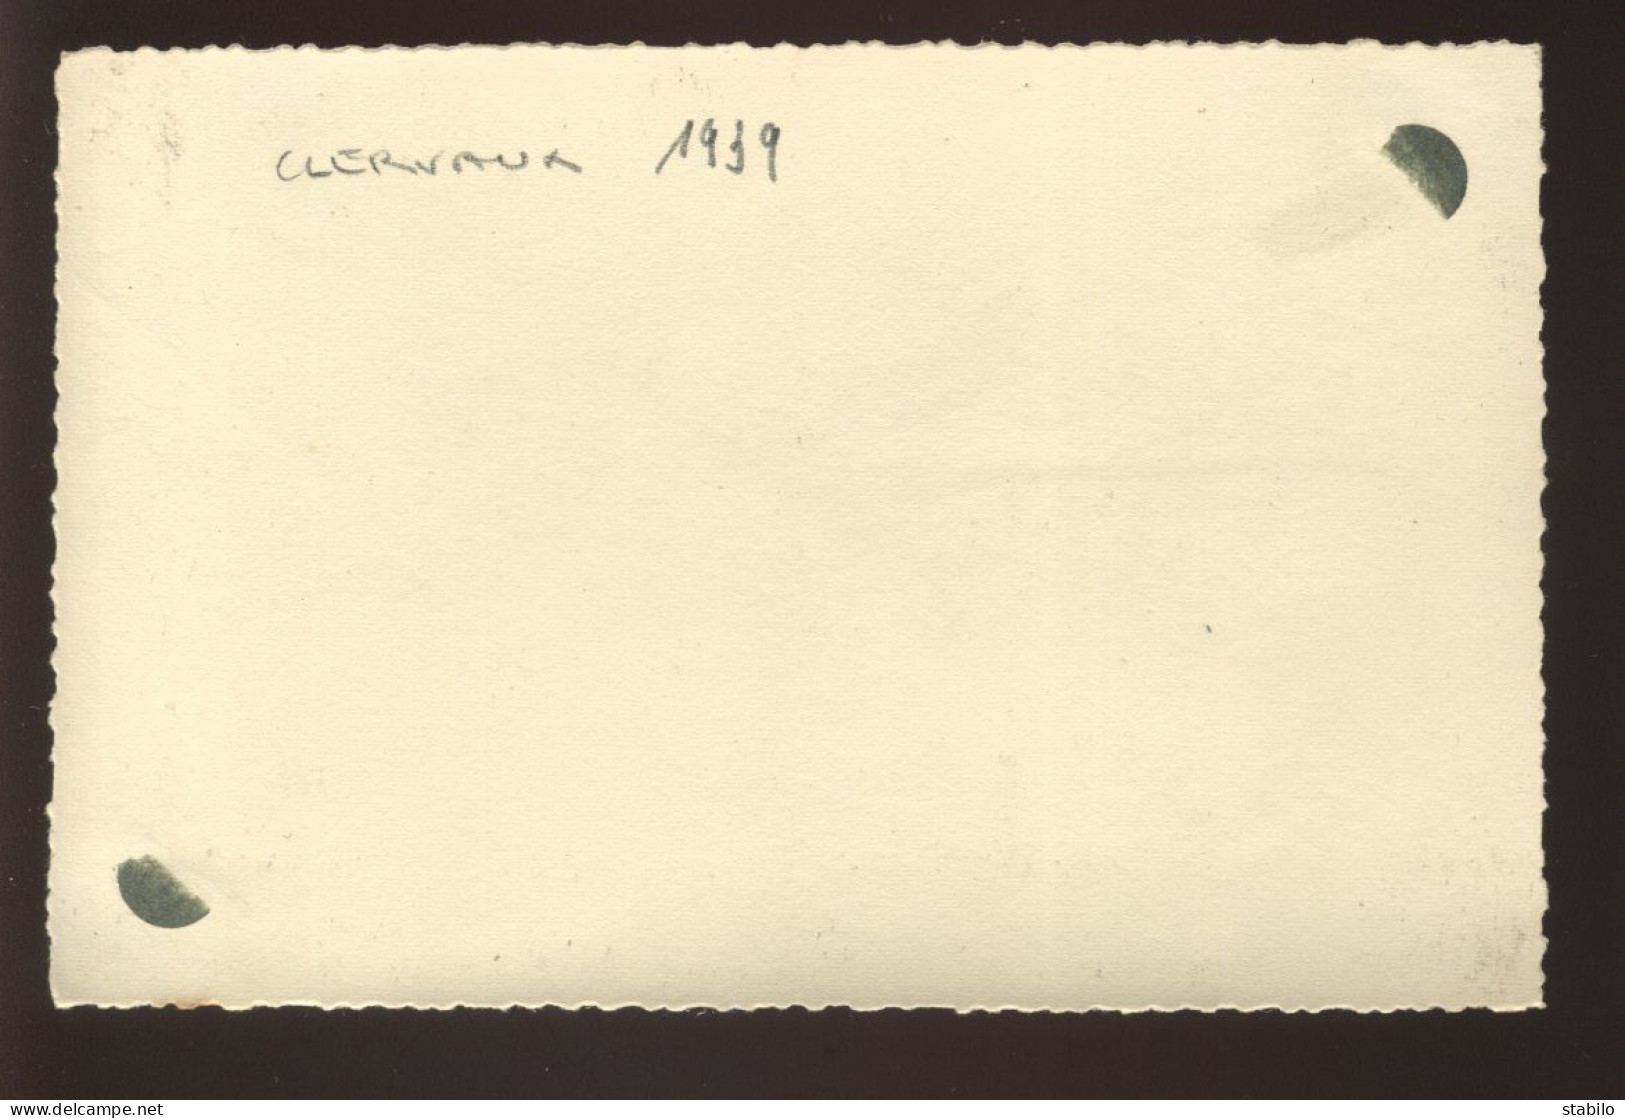 LUXEMBOURG - CLERVAUX - 1939 - FORMAT 13.5 X 8.8 CM - Orte